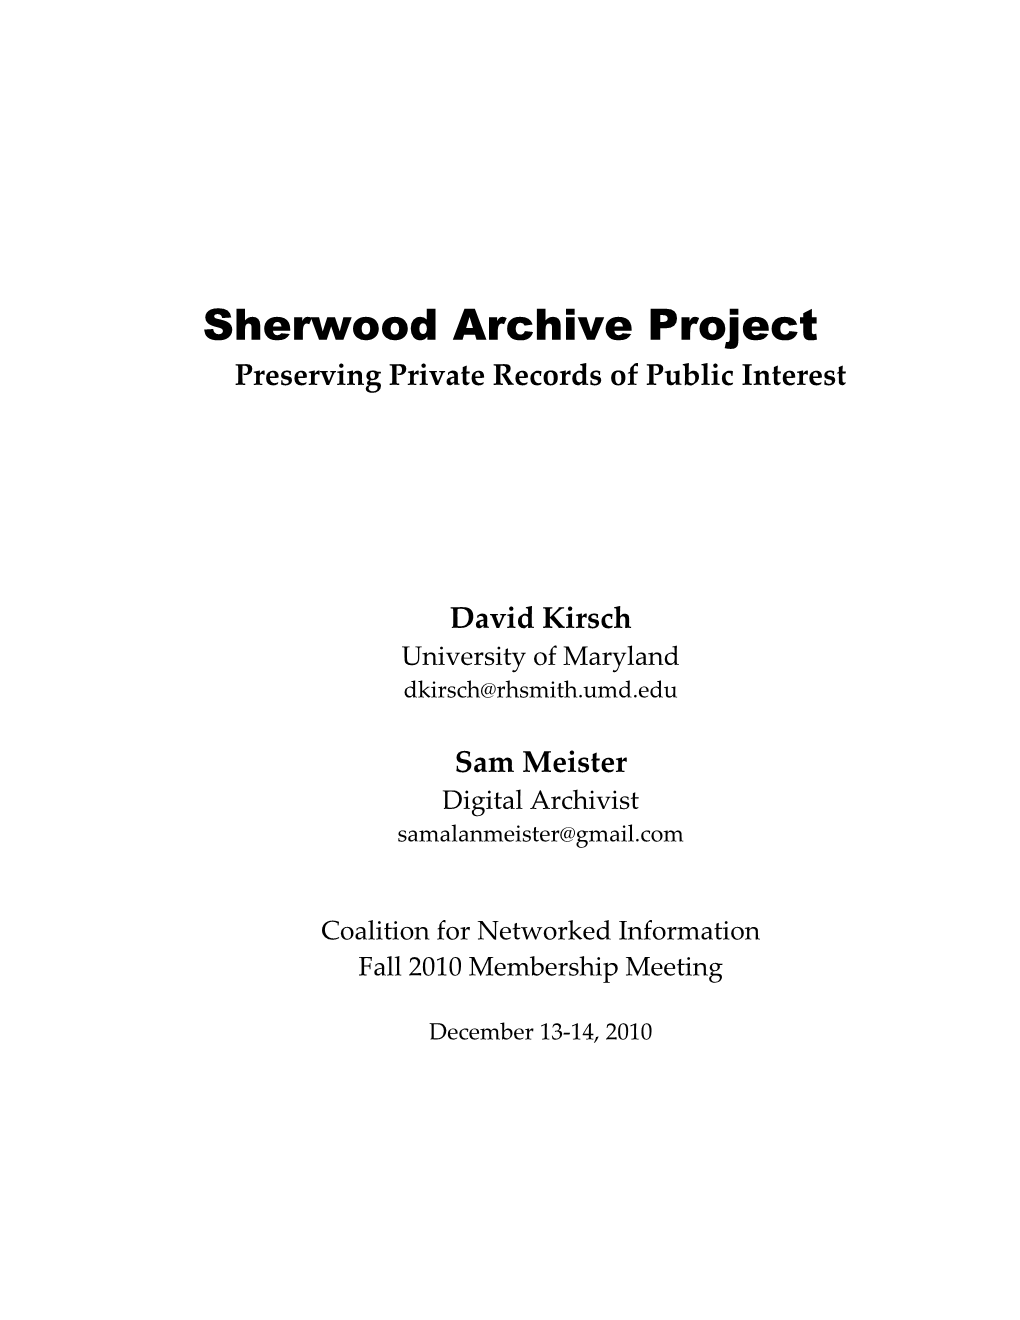 The Sherwood Archive Project (SAP) Represents an Attempt to Save the Records of Business